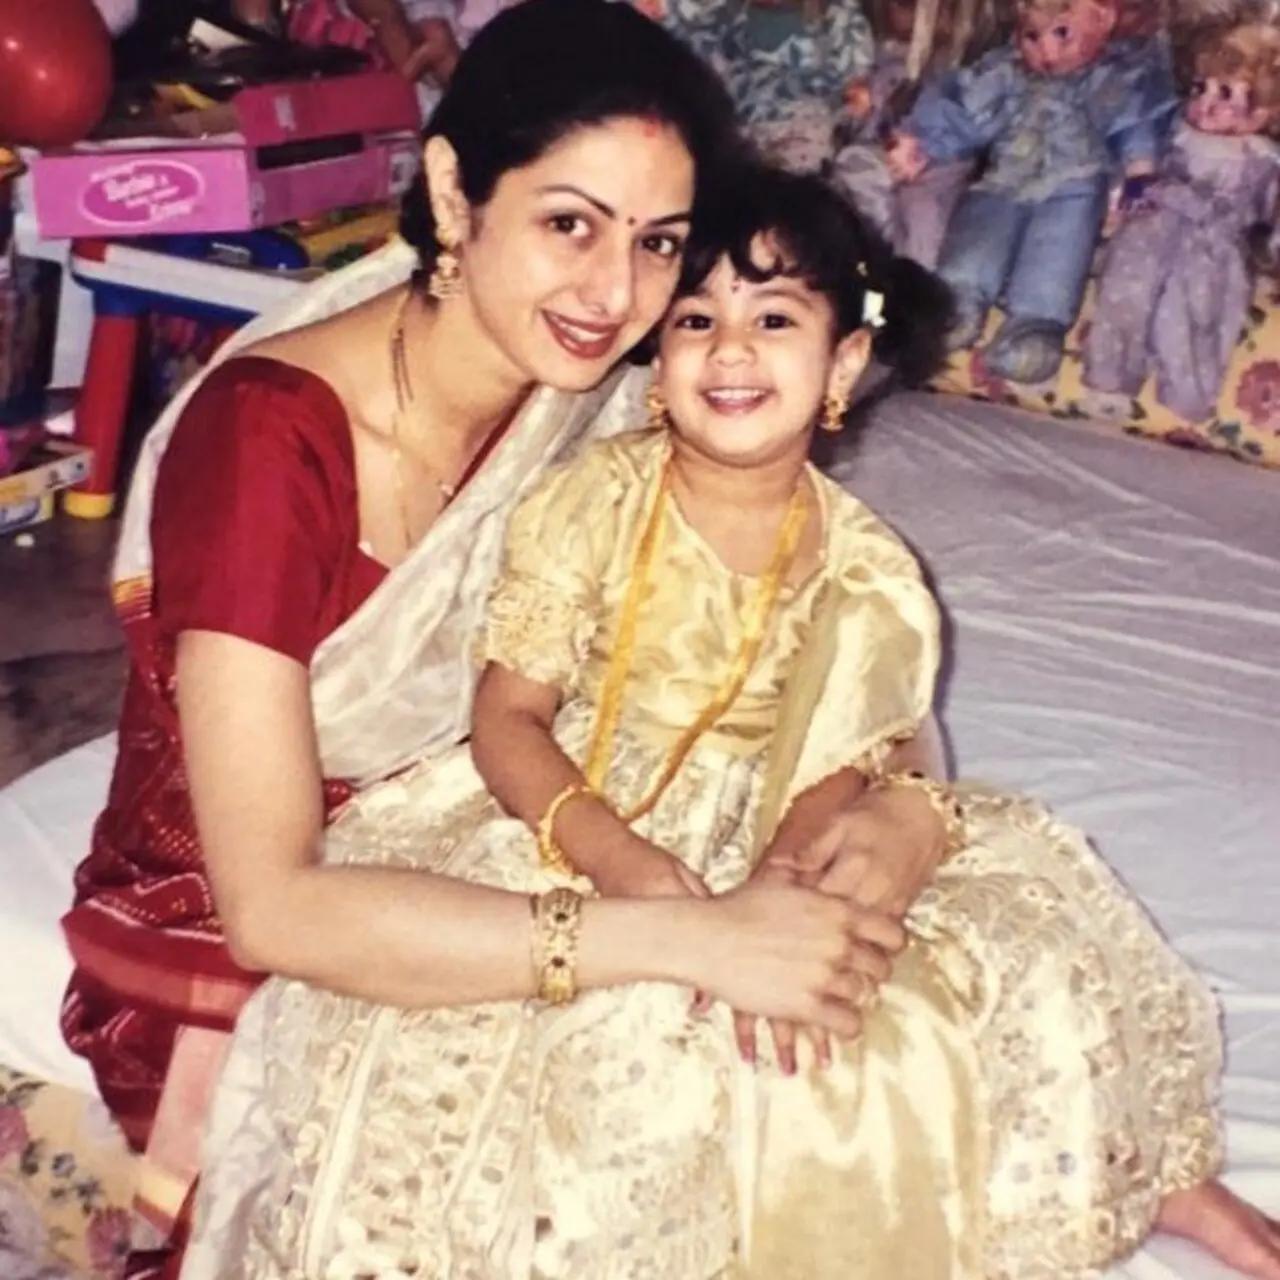 Janhvi Kapoor and Sridevi are making our little hearts melt. Too much cuteness in one photo!